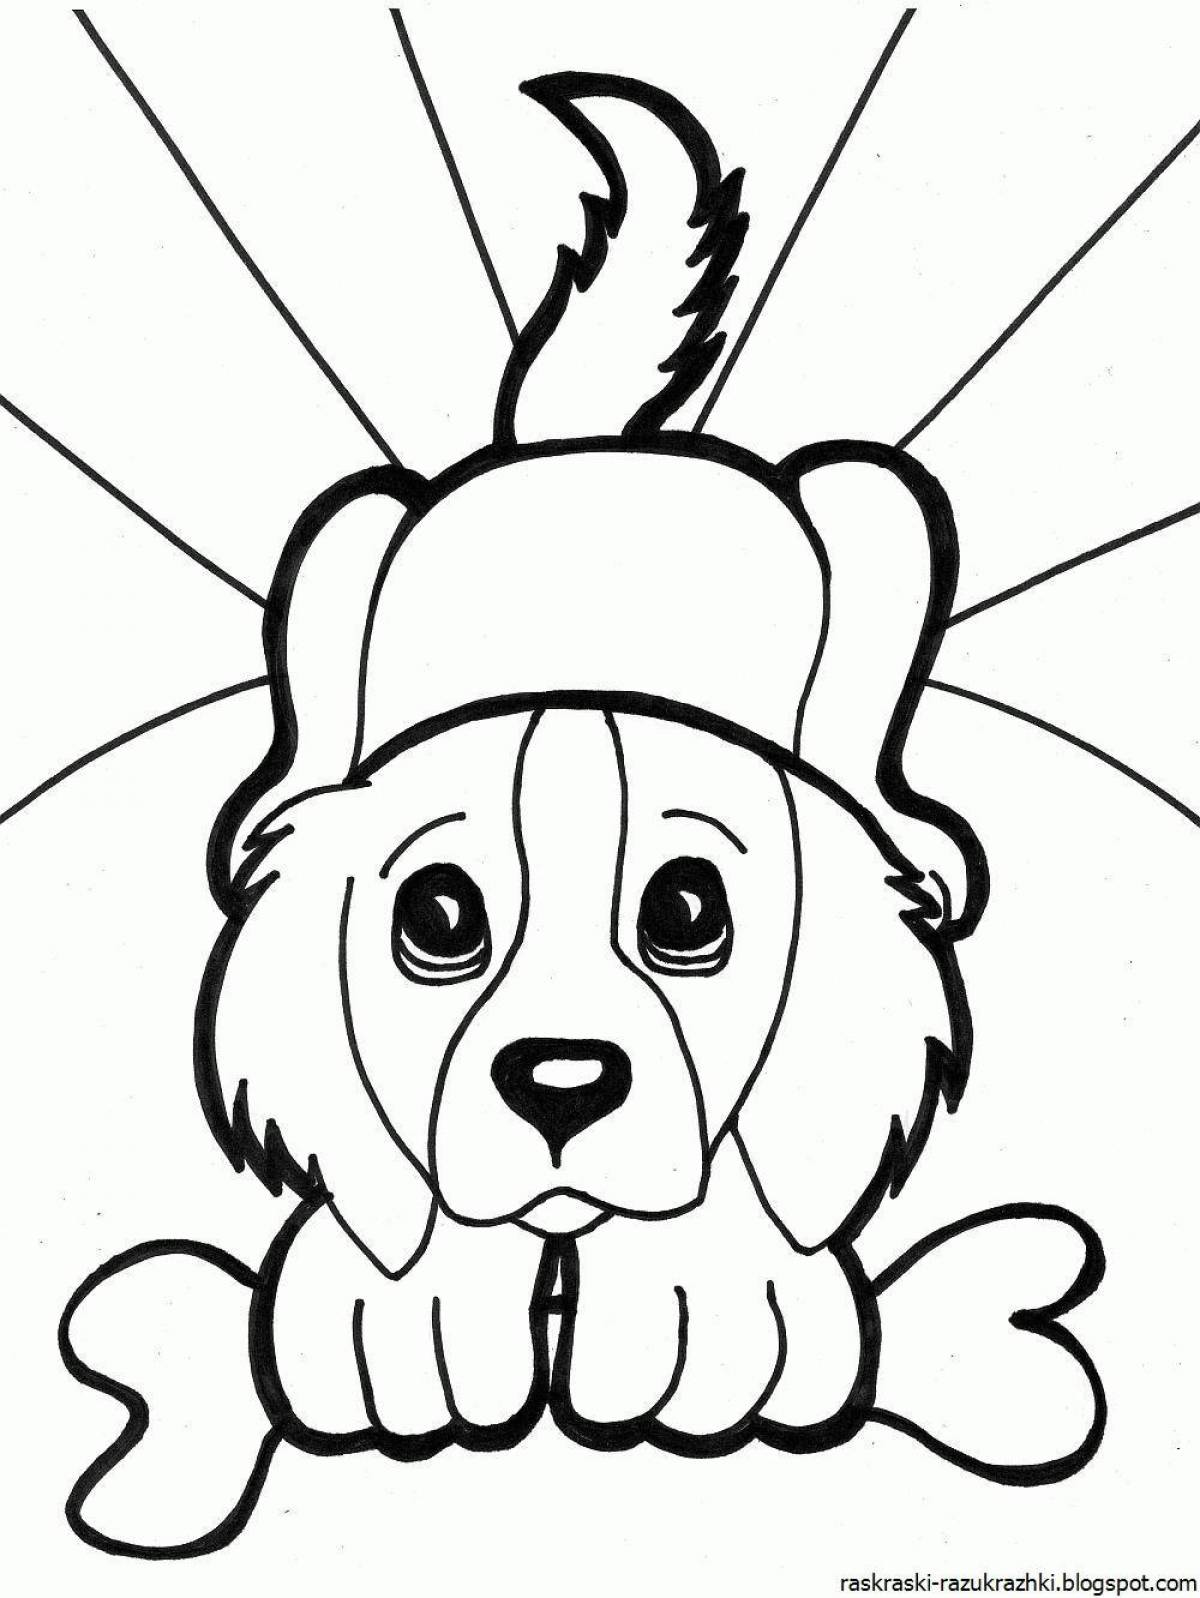 Outstanding dog coloring book for babies